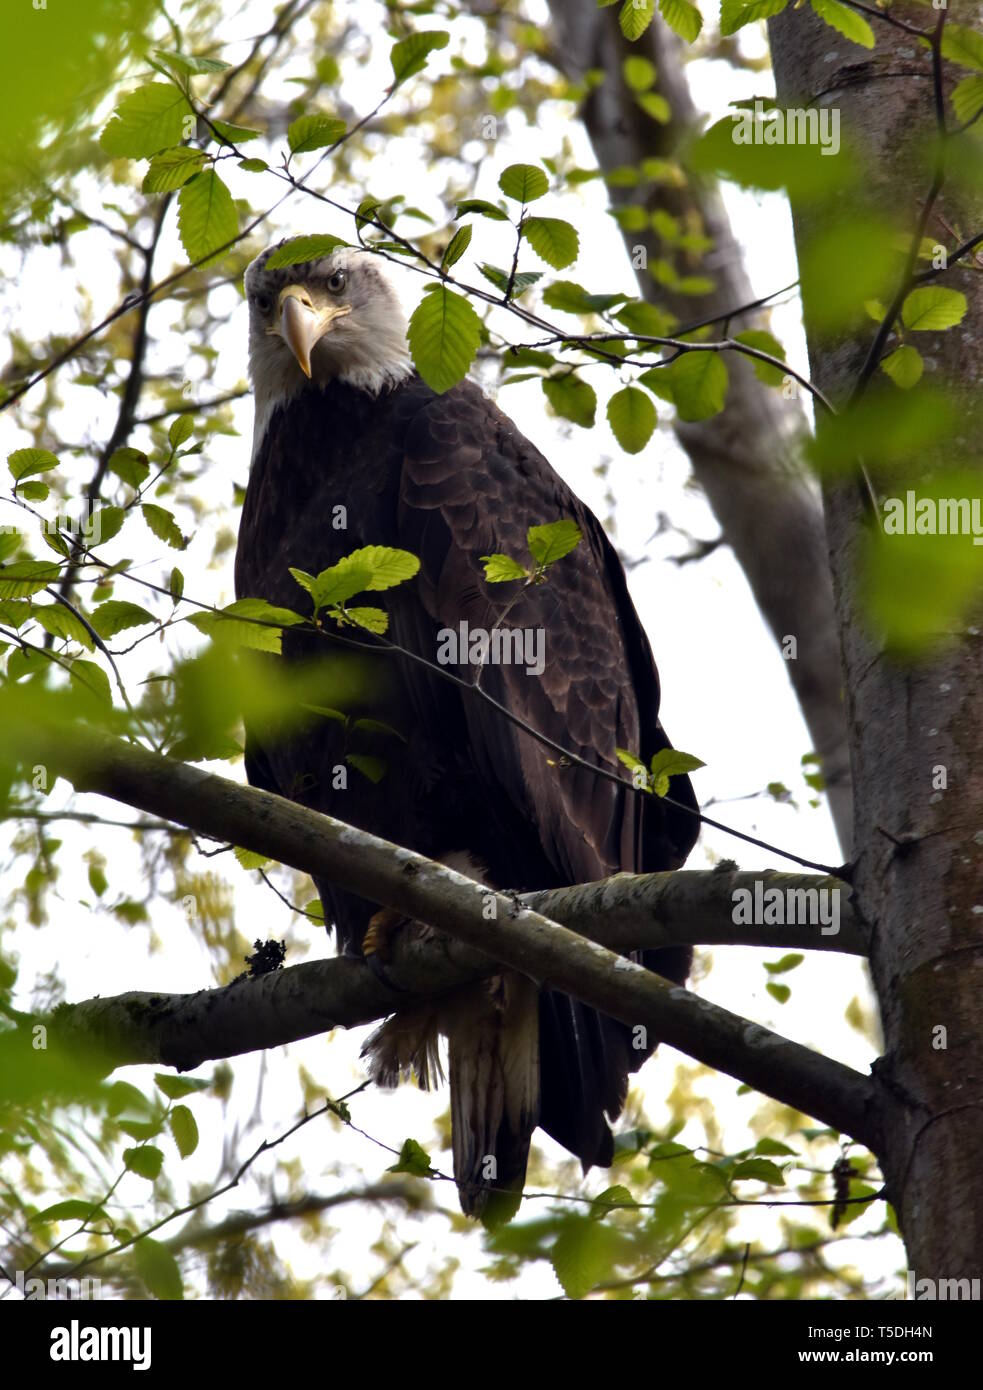 Photograph of a bald eagle perched in a tree looking down at the camera Stock Photo